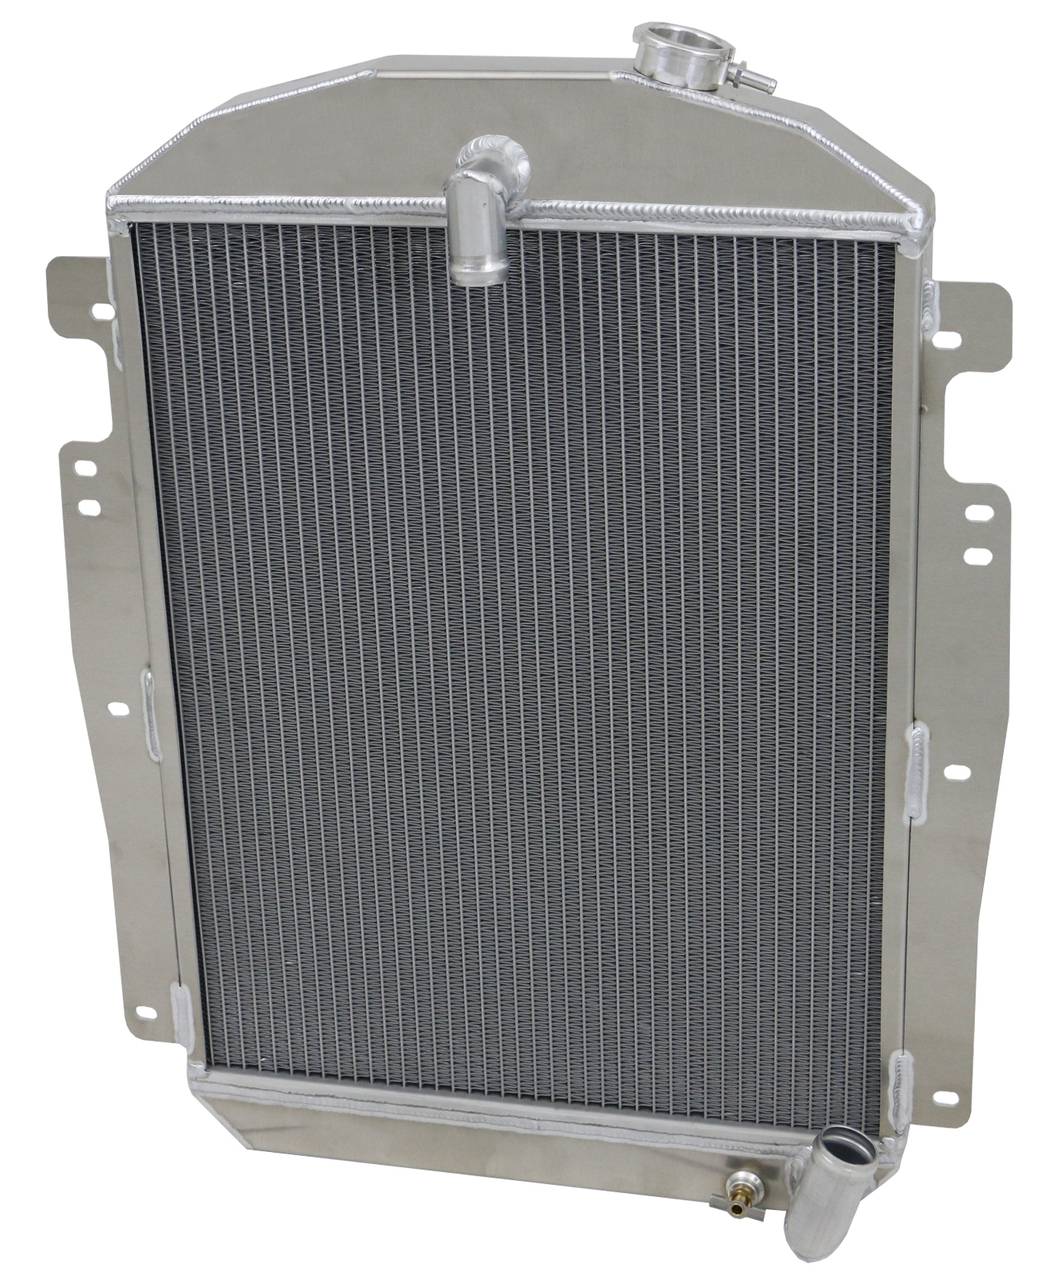 Wizard Cooling Inc - Wizard Cooling - 1937-1939 Chevrolet Trucks Aluminum Radiator (Straight 6, With AC Condenser) - 80516-500AC